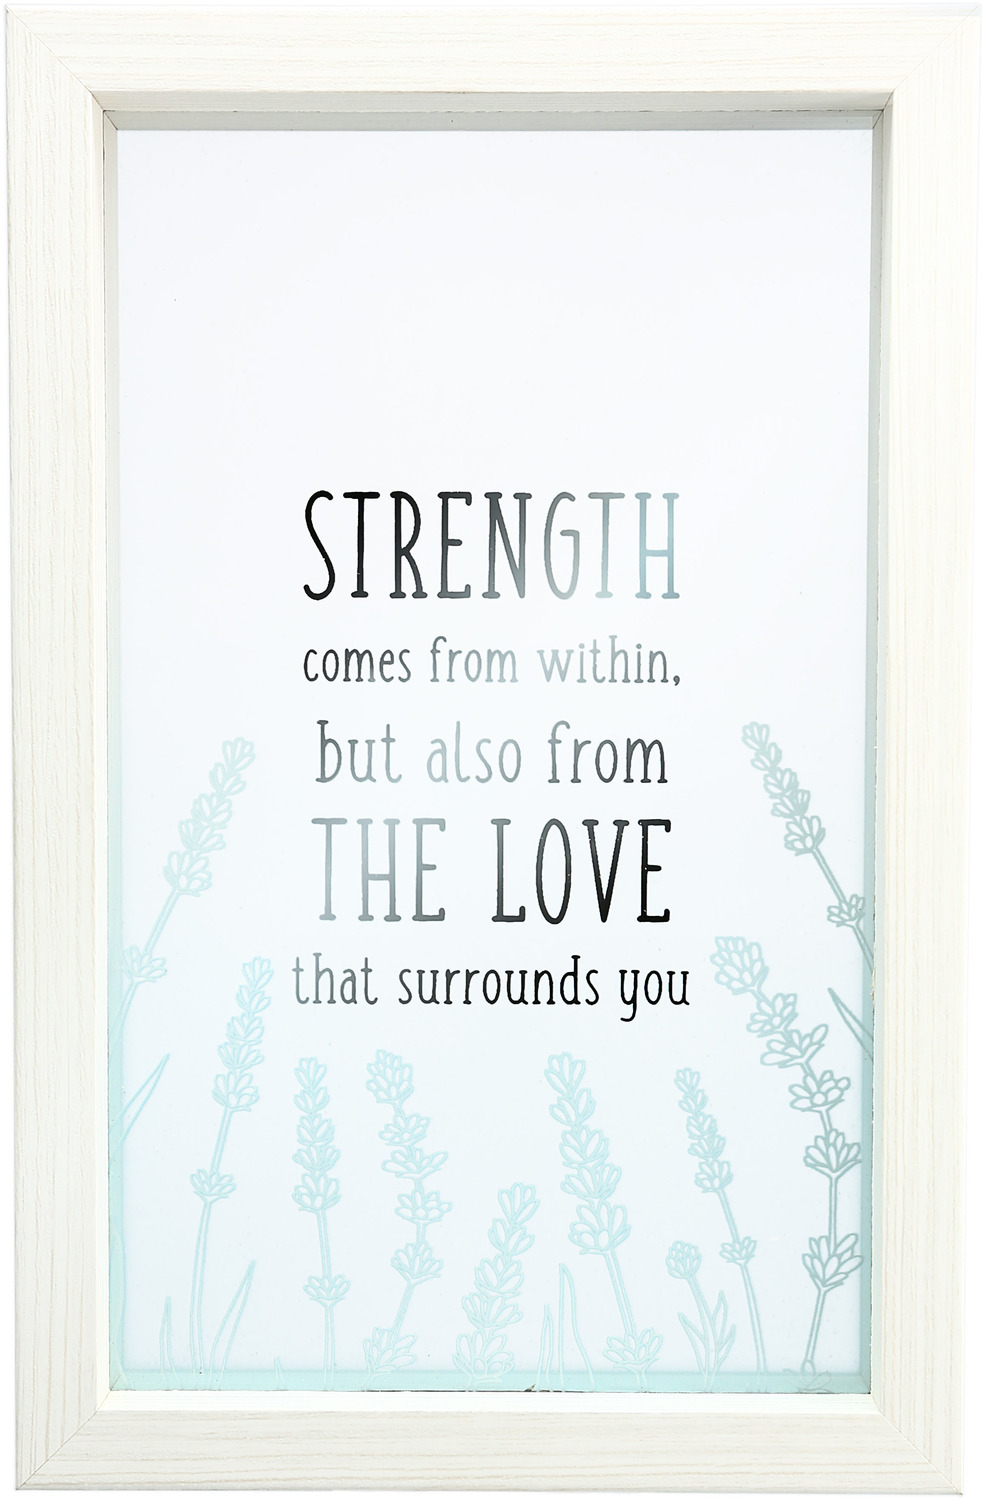 Strength by Faith Hope and Healing - Strength - 5.5" x 8.5" Framed Glass Plaque